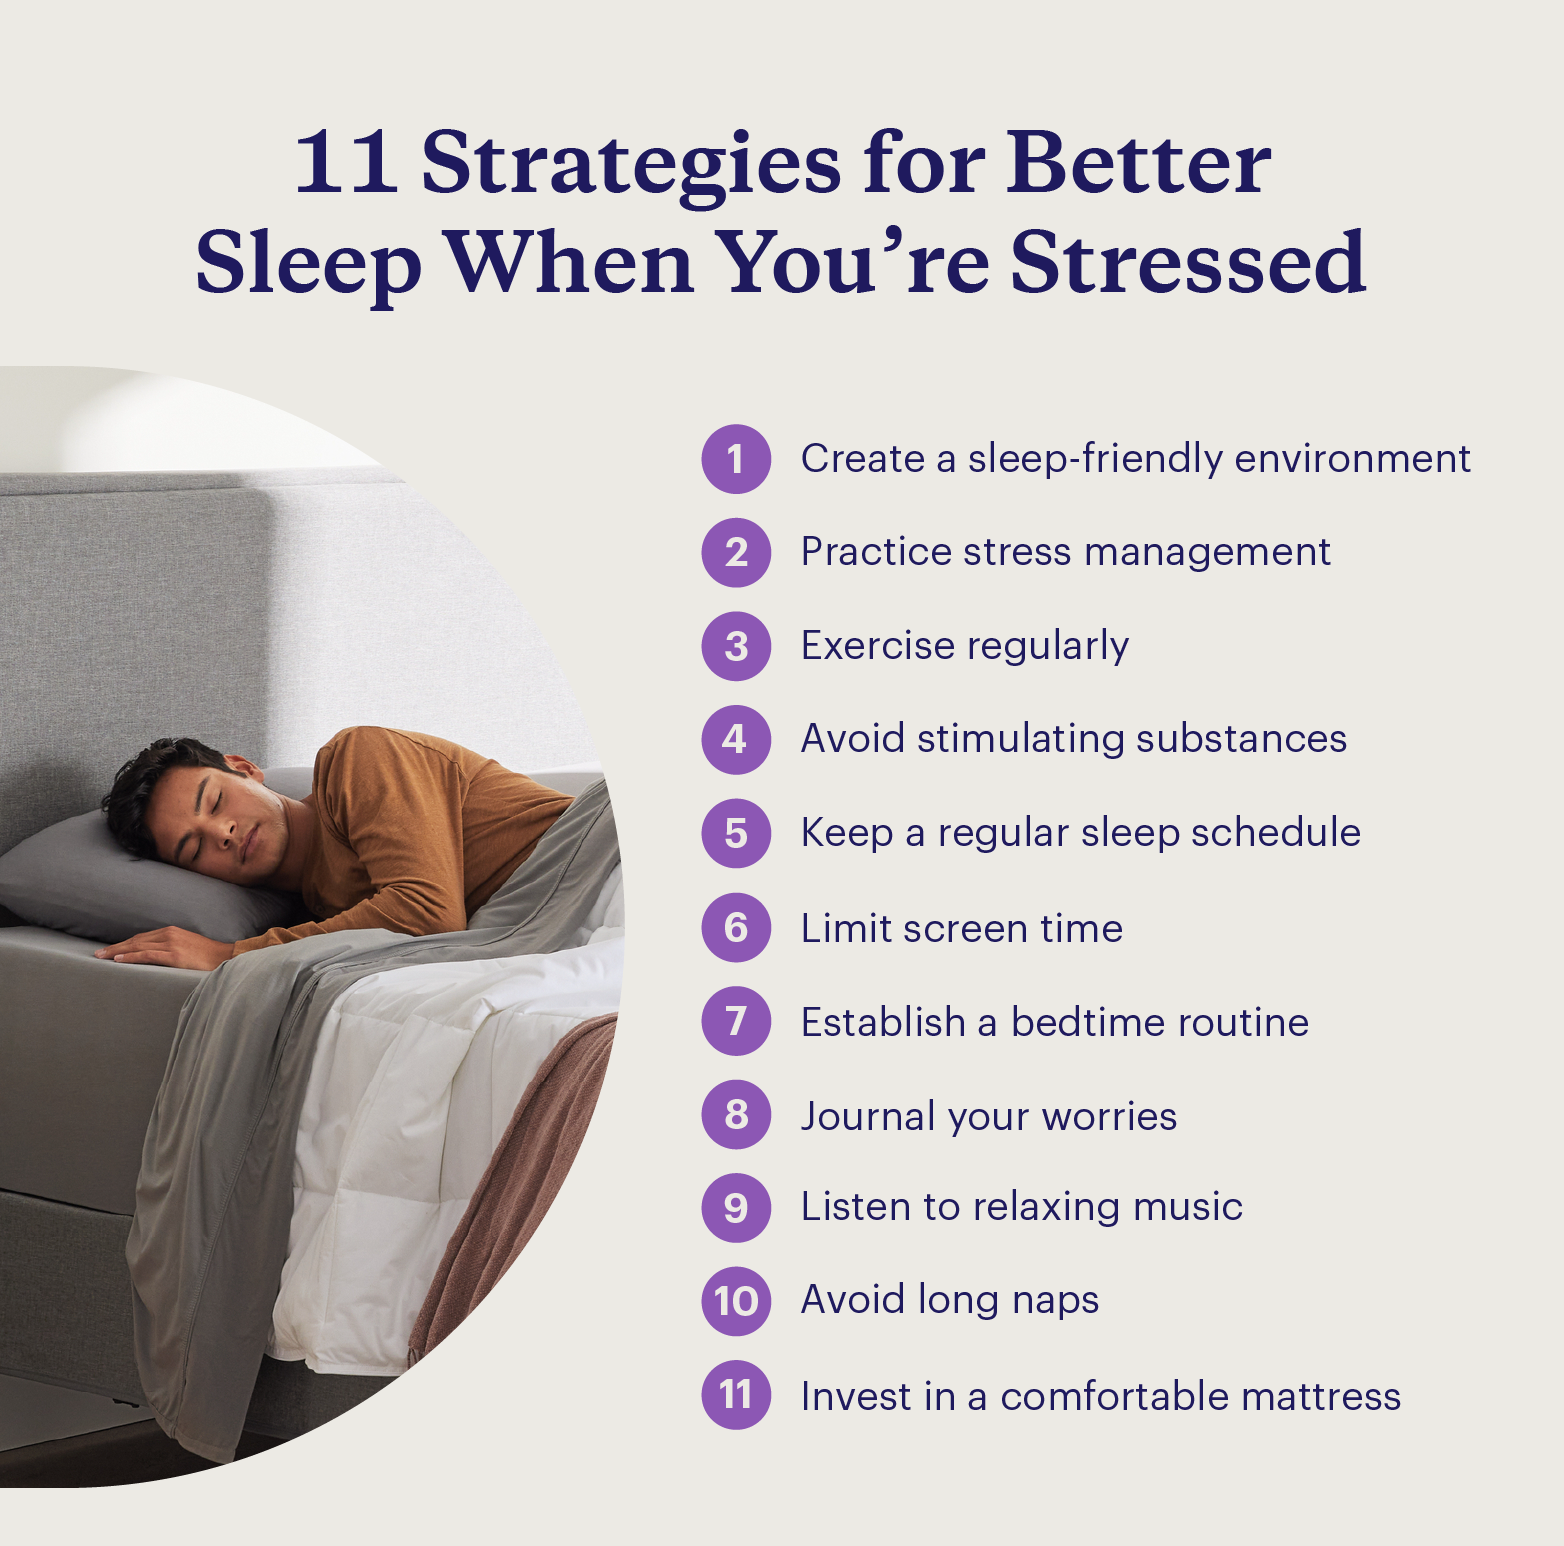 11 strategies for sleeping better when you're too stressed to sleep.